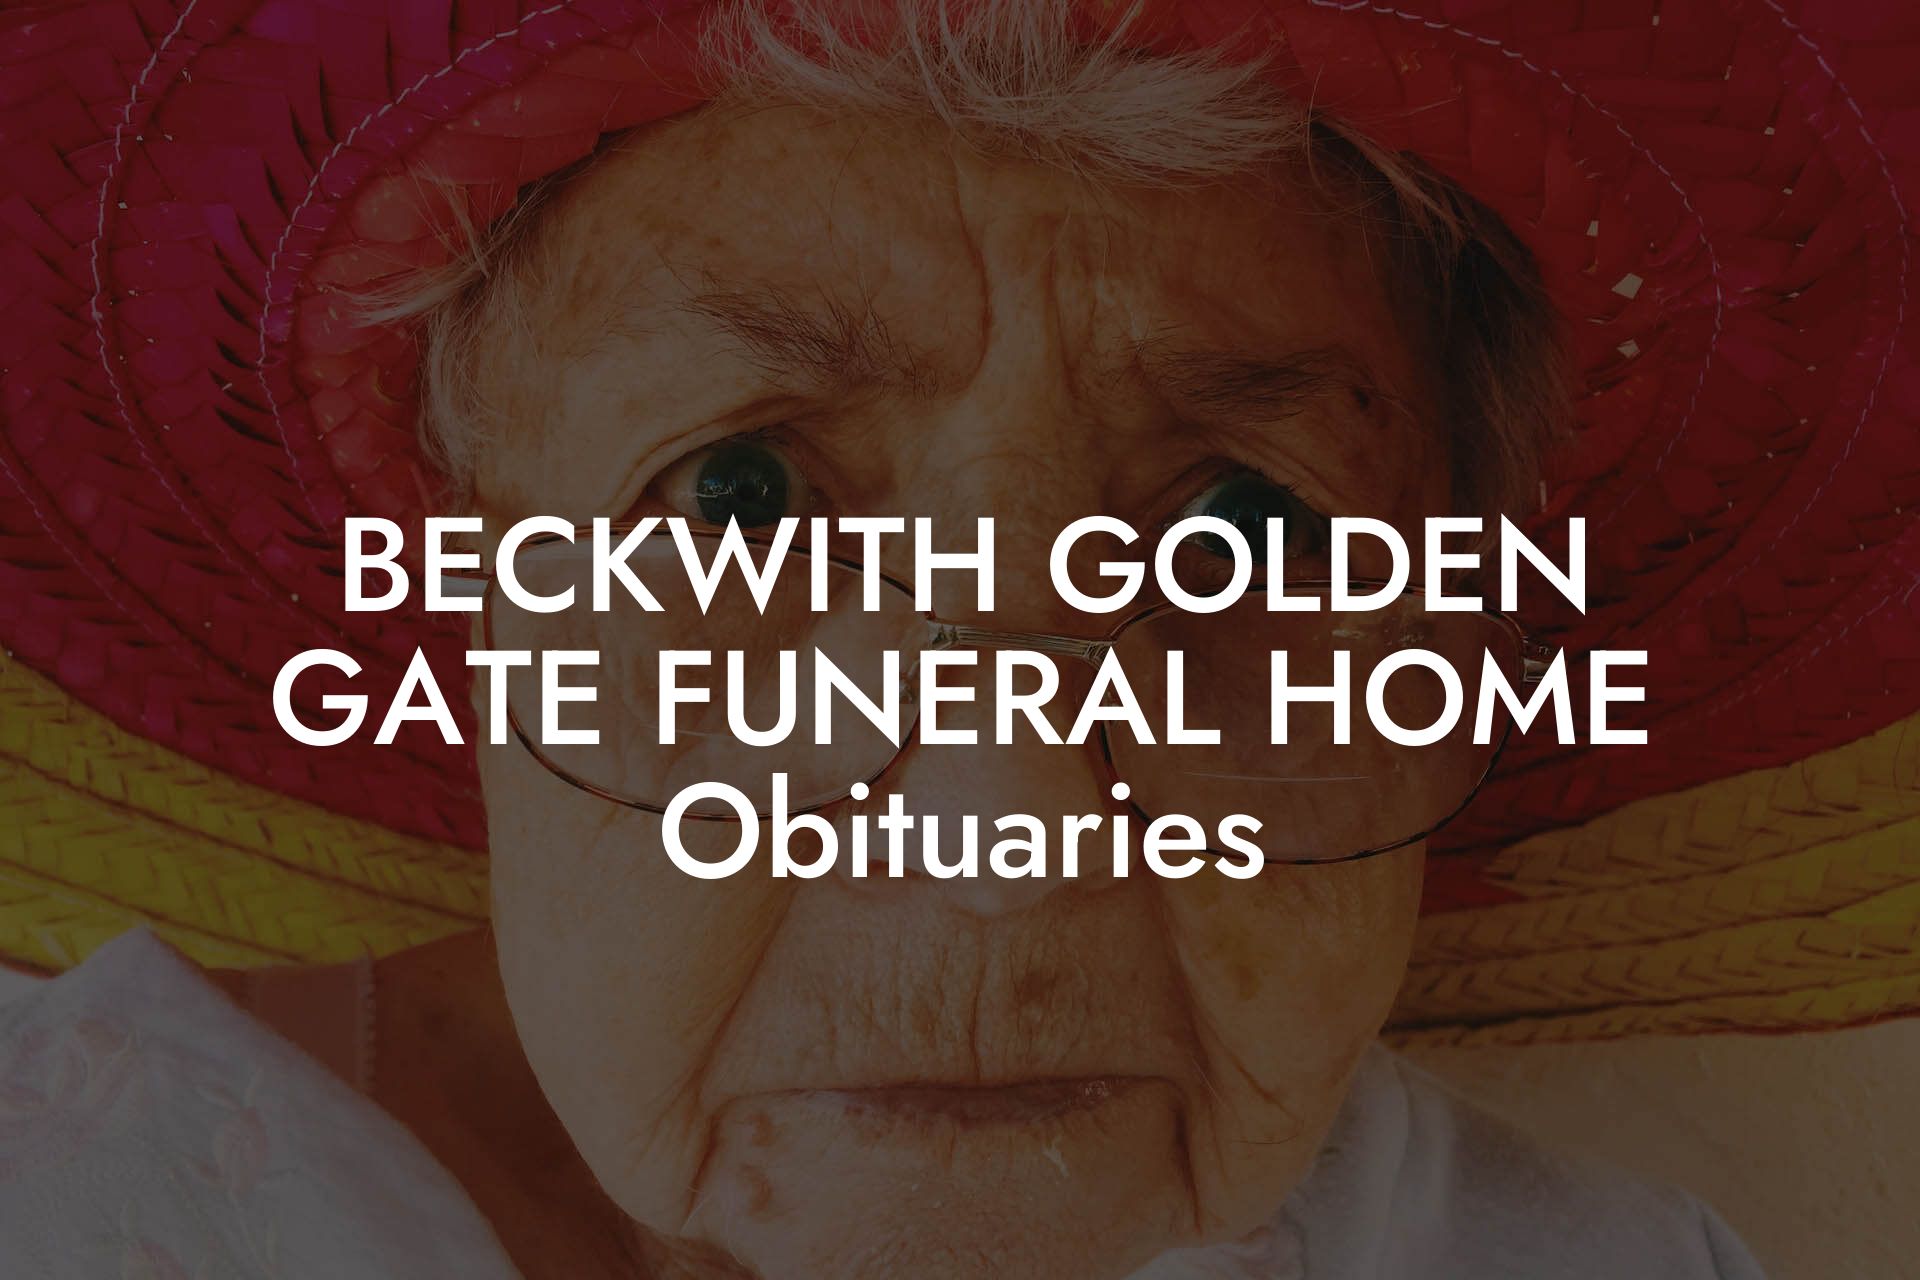 Beckwith Golden Gate Funeral Home Obituaries